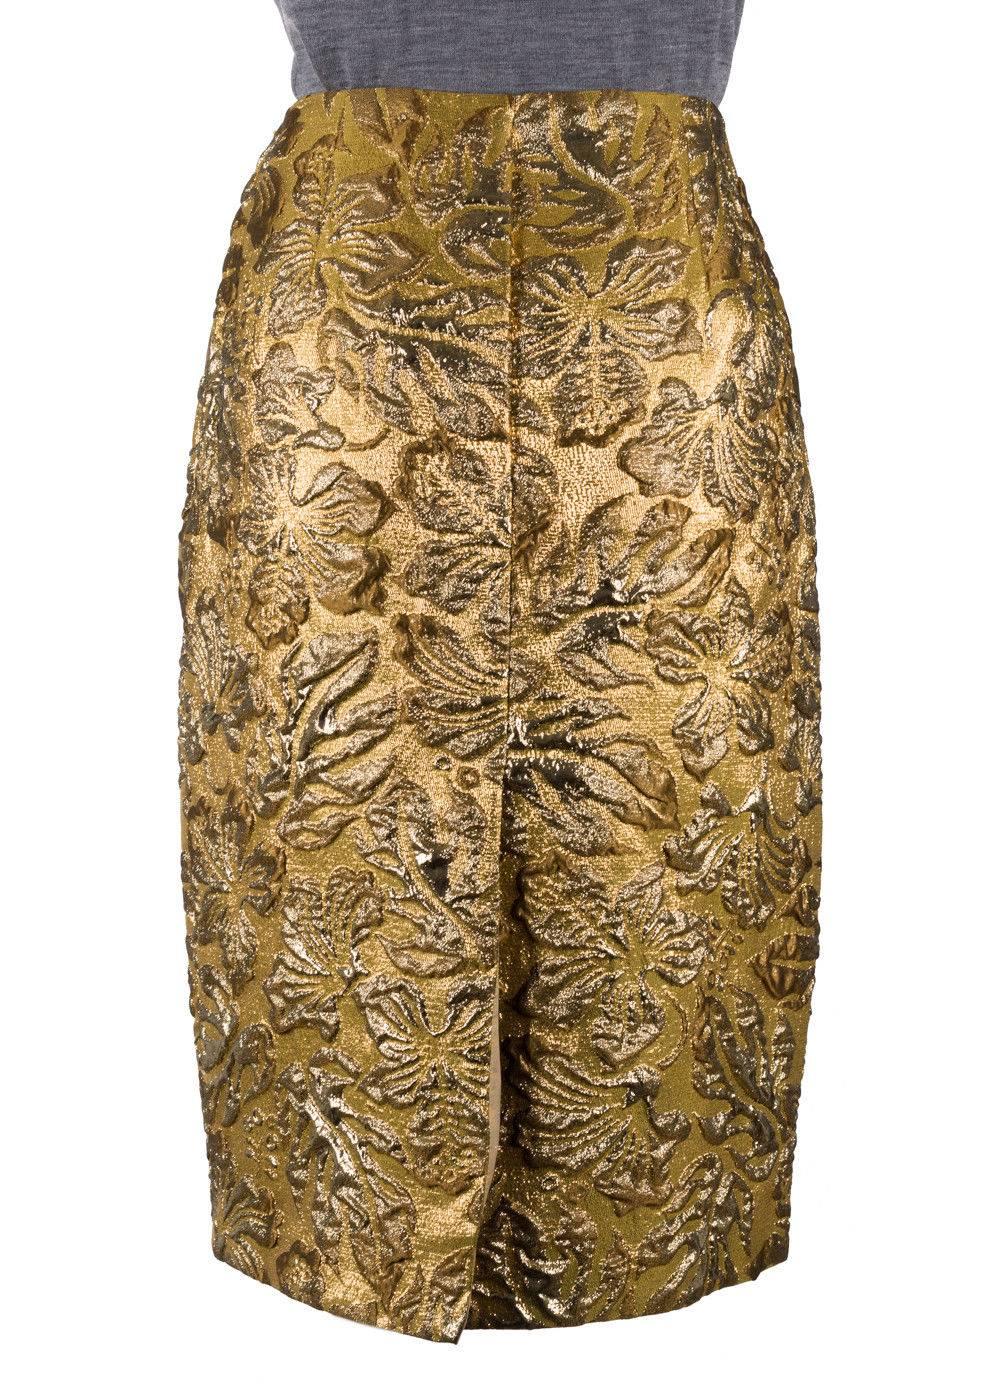 Brand New Prada Womens Metallic Floral Embossed Pencil Skirt
Original Tag
Retails in Stores & Online for $1400
Women's Size EUR 42/ US 4 Fits True to Size

Prada's Floral Metallic Pencil Skirt is a sight to be held. This silk blended masterpiece